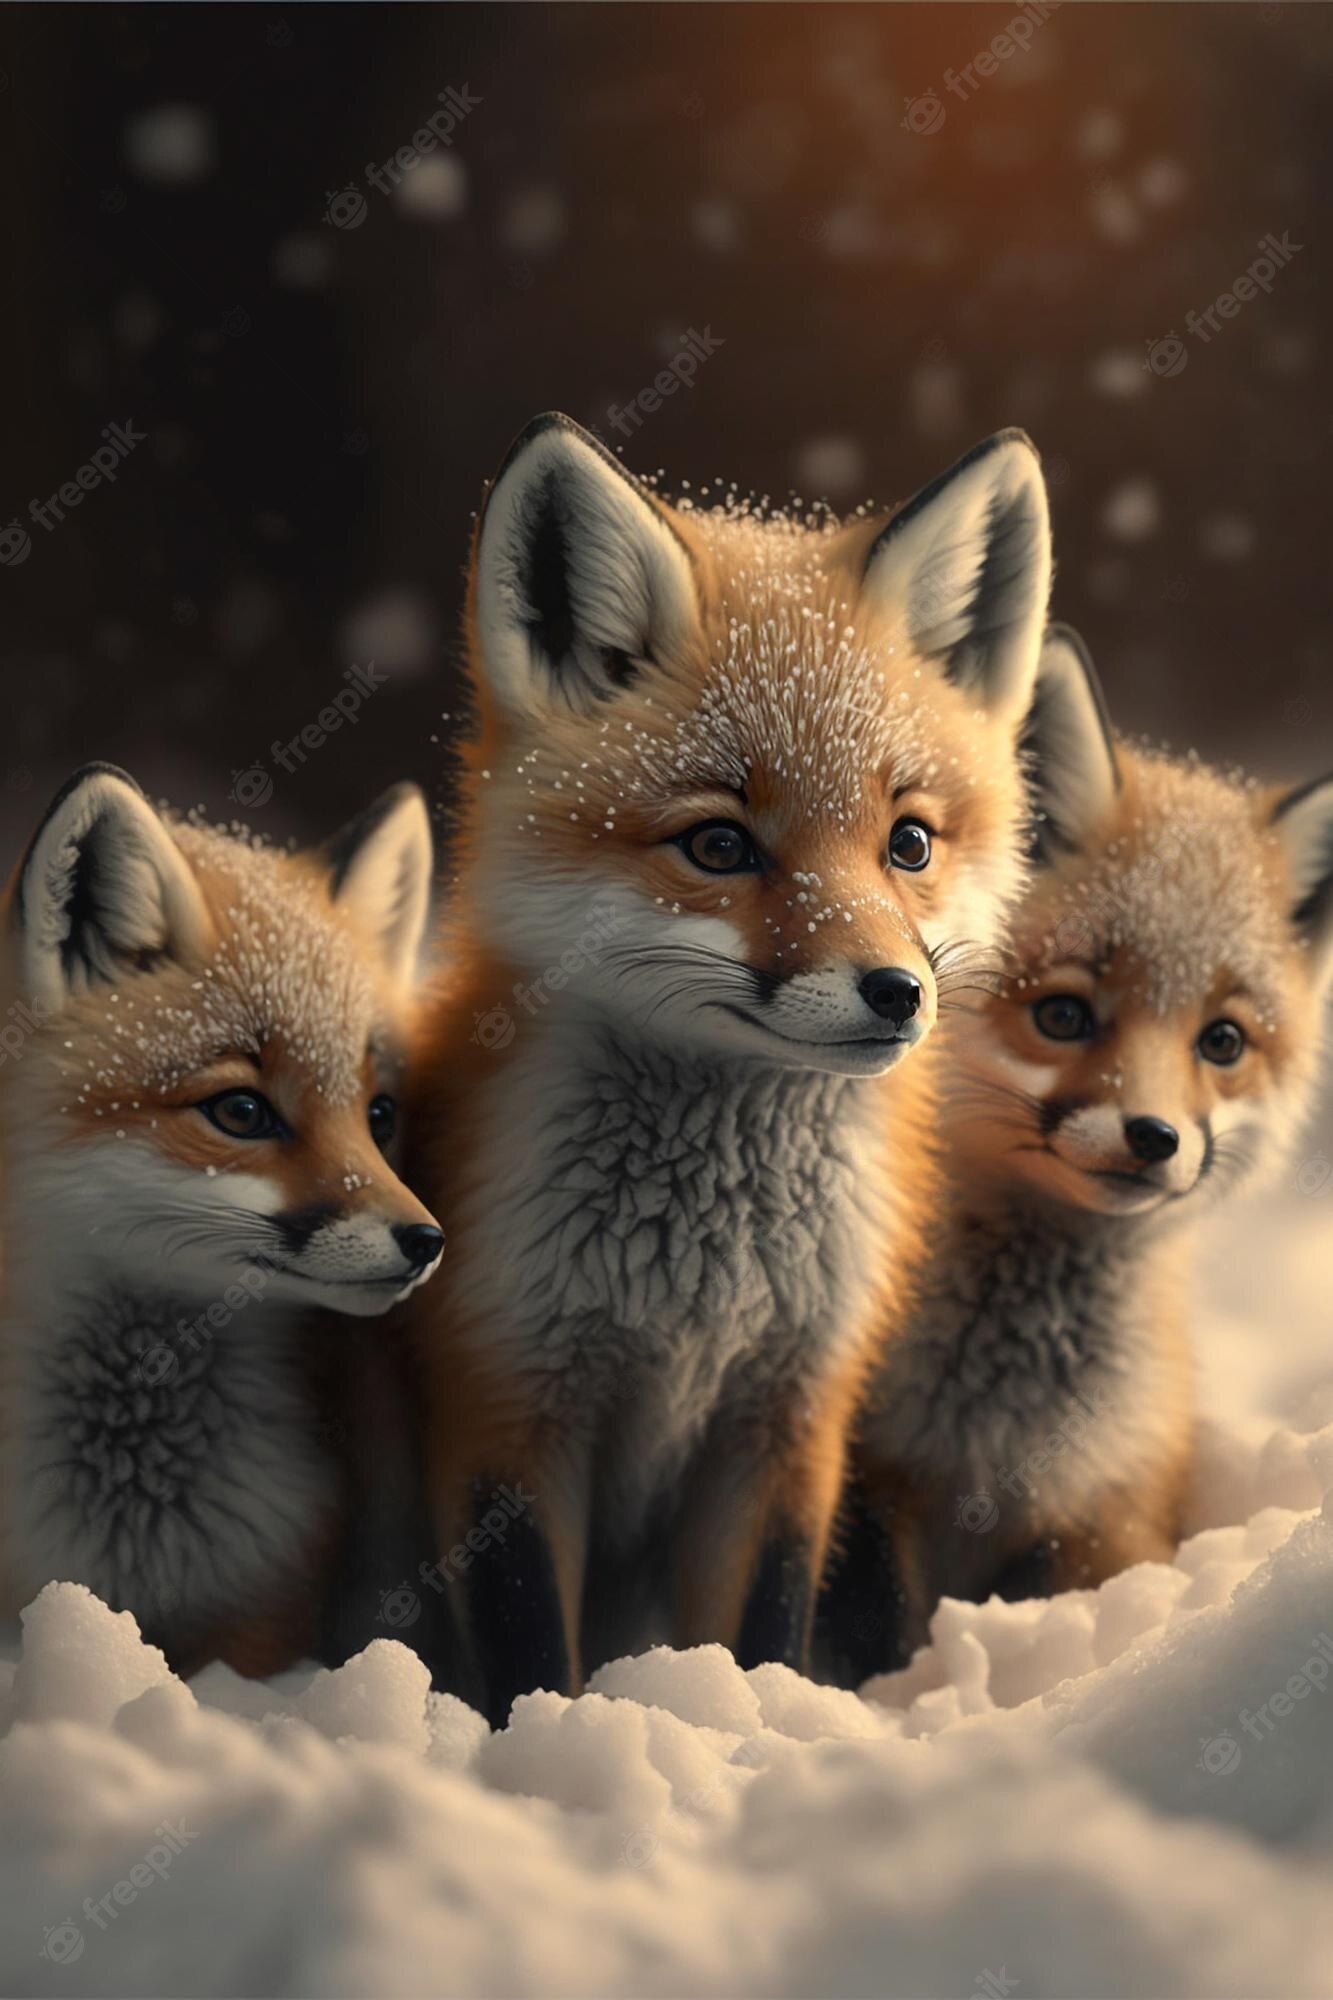 Three foxes sitting in the snow - Fox